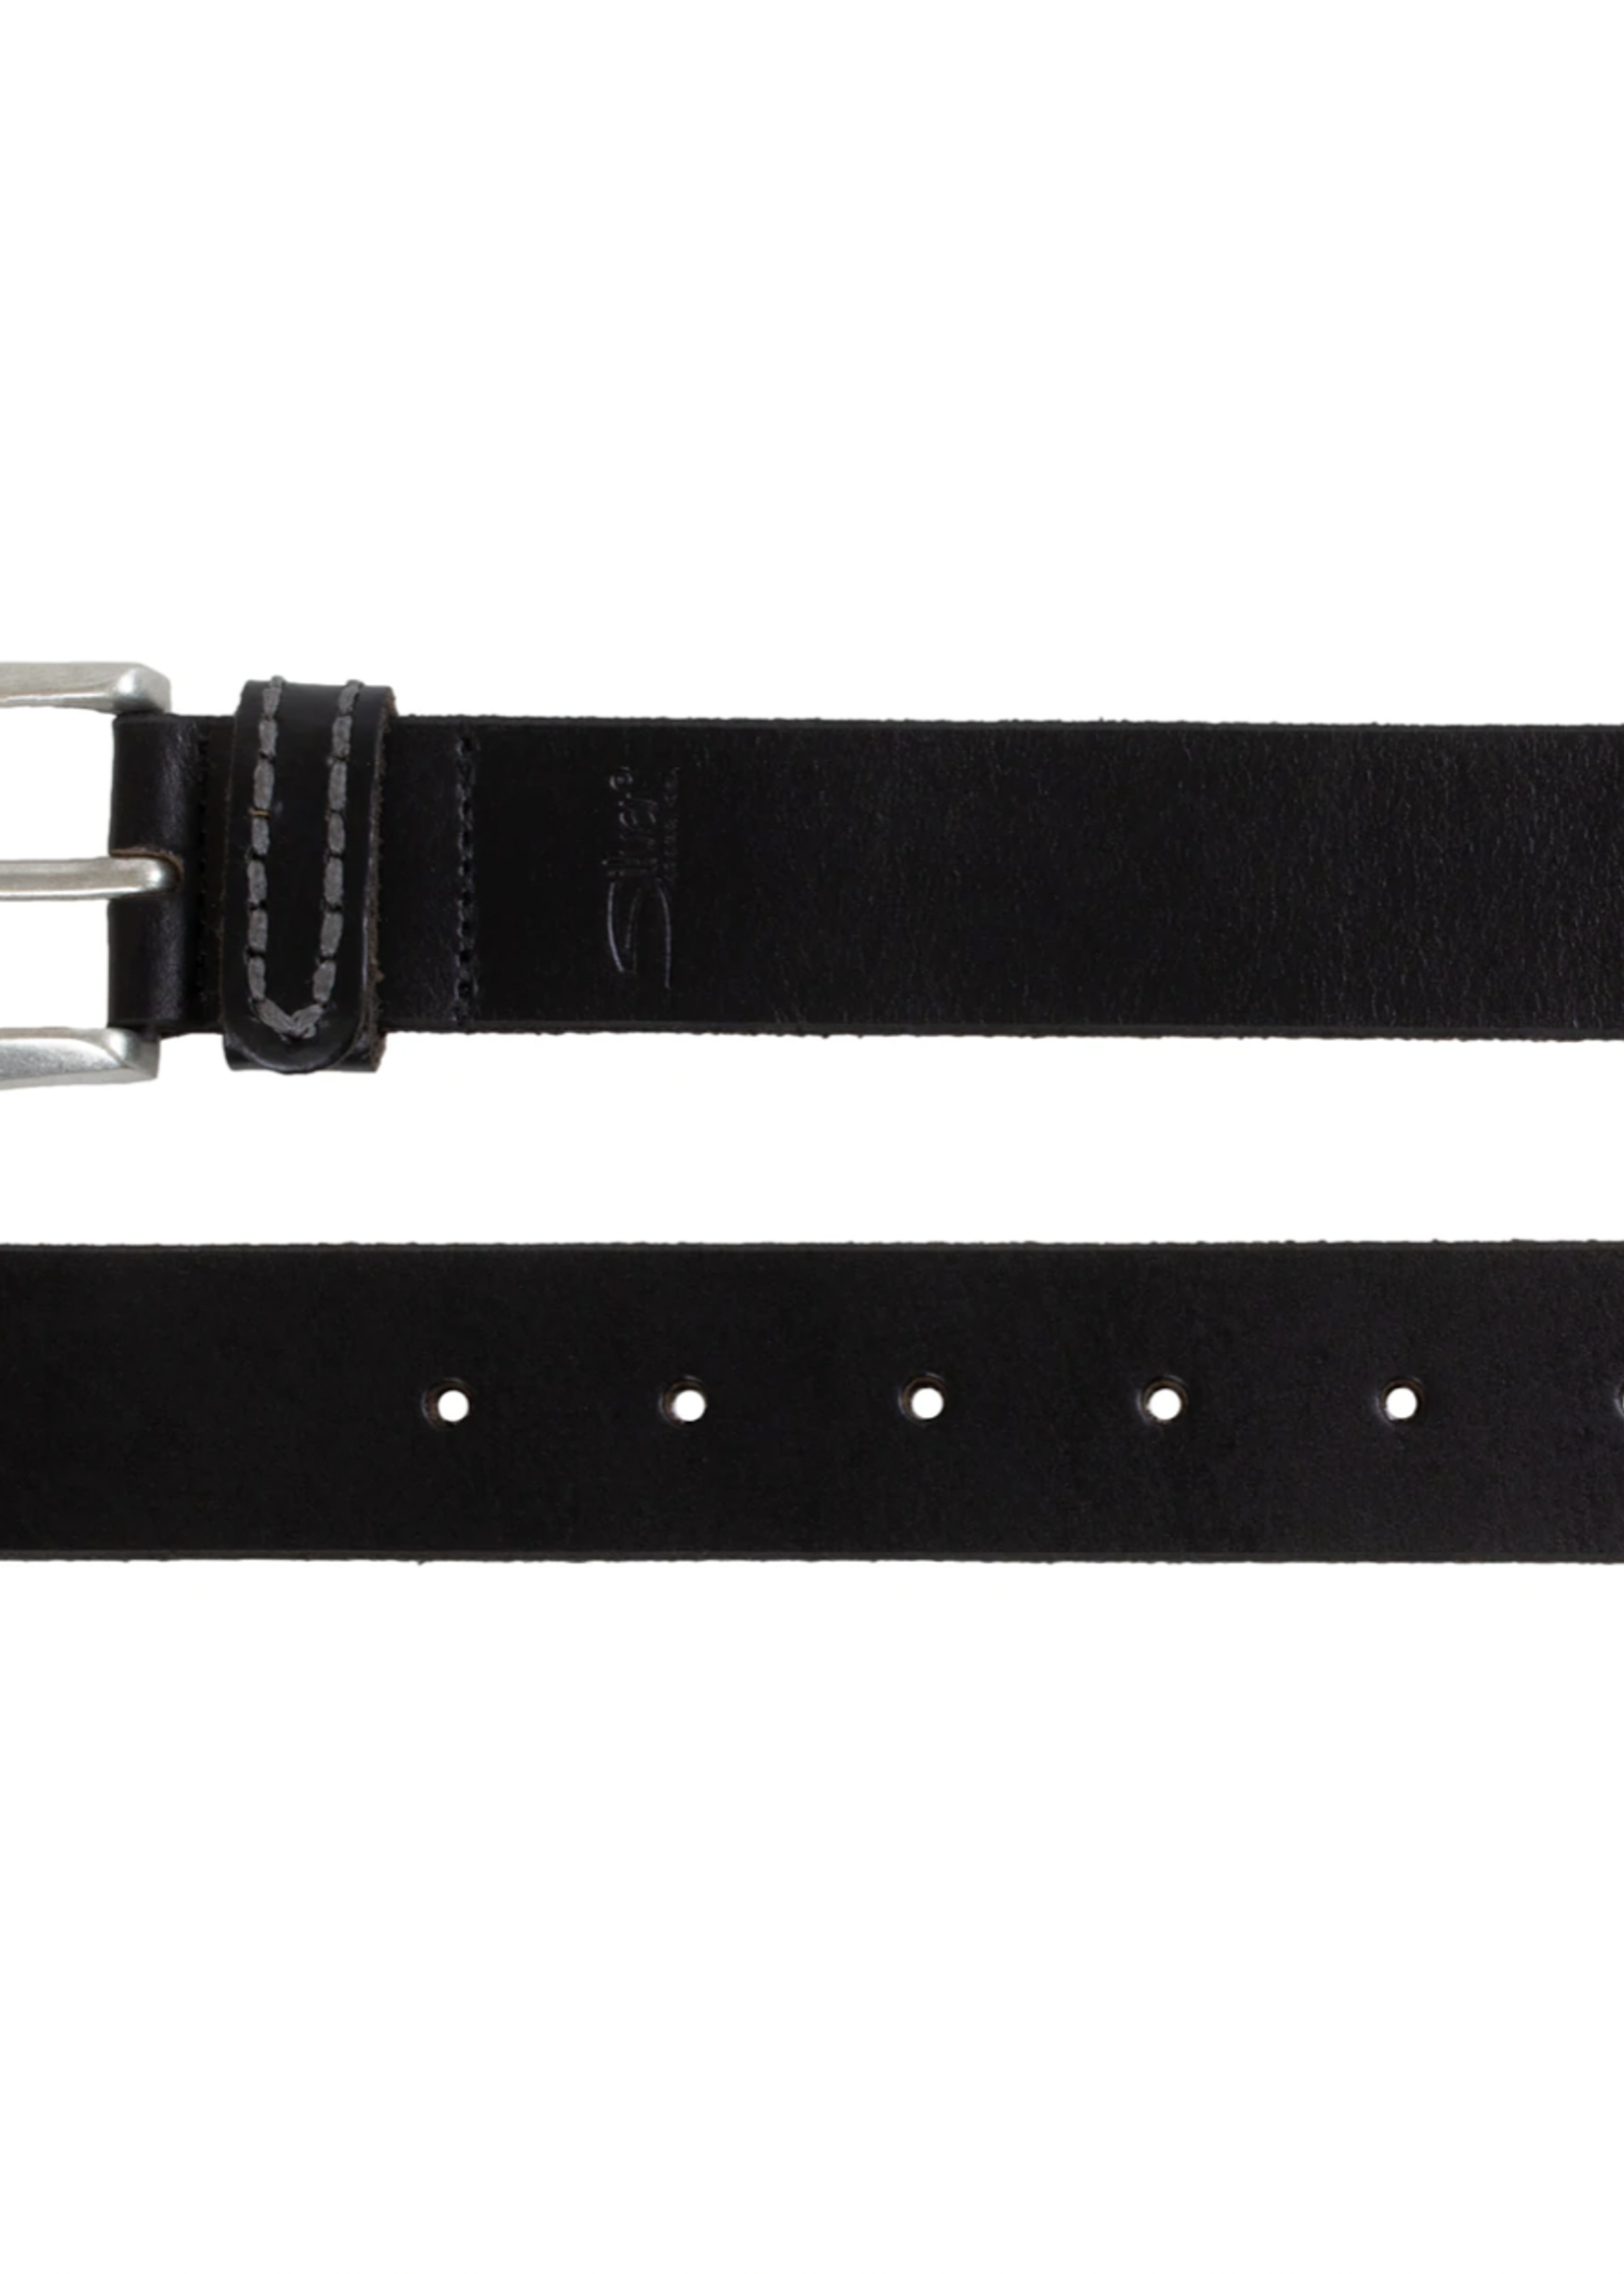 Silver Jeans Co. Silver Jeans Co. Leather Belt Black Sewn w/ Wrapped Loop 519